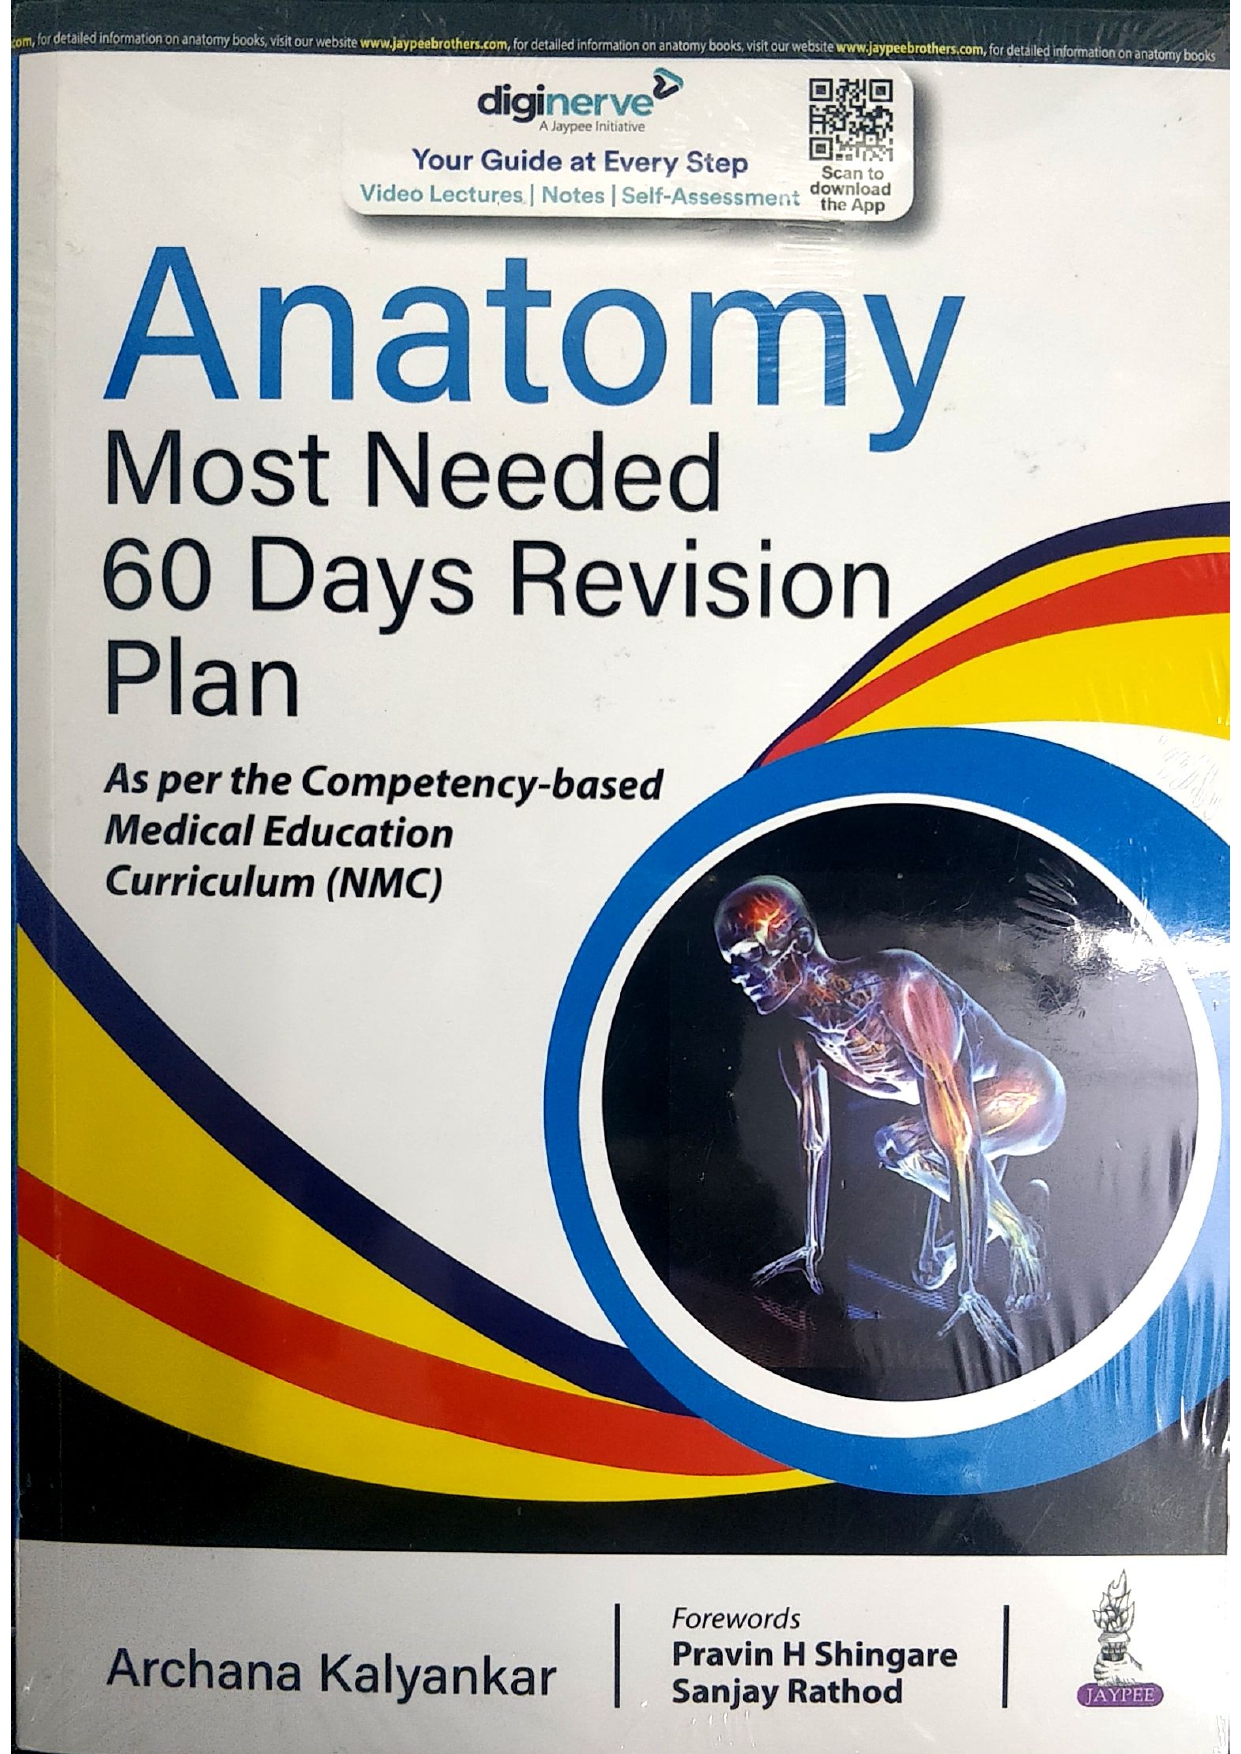 Textbook of Anatomy Most Needed (60 Days Revision Plan)